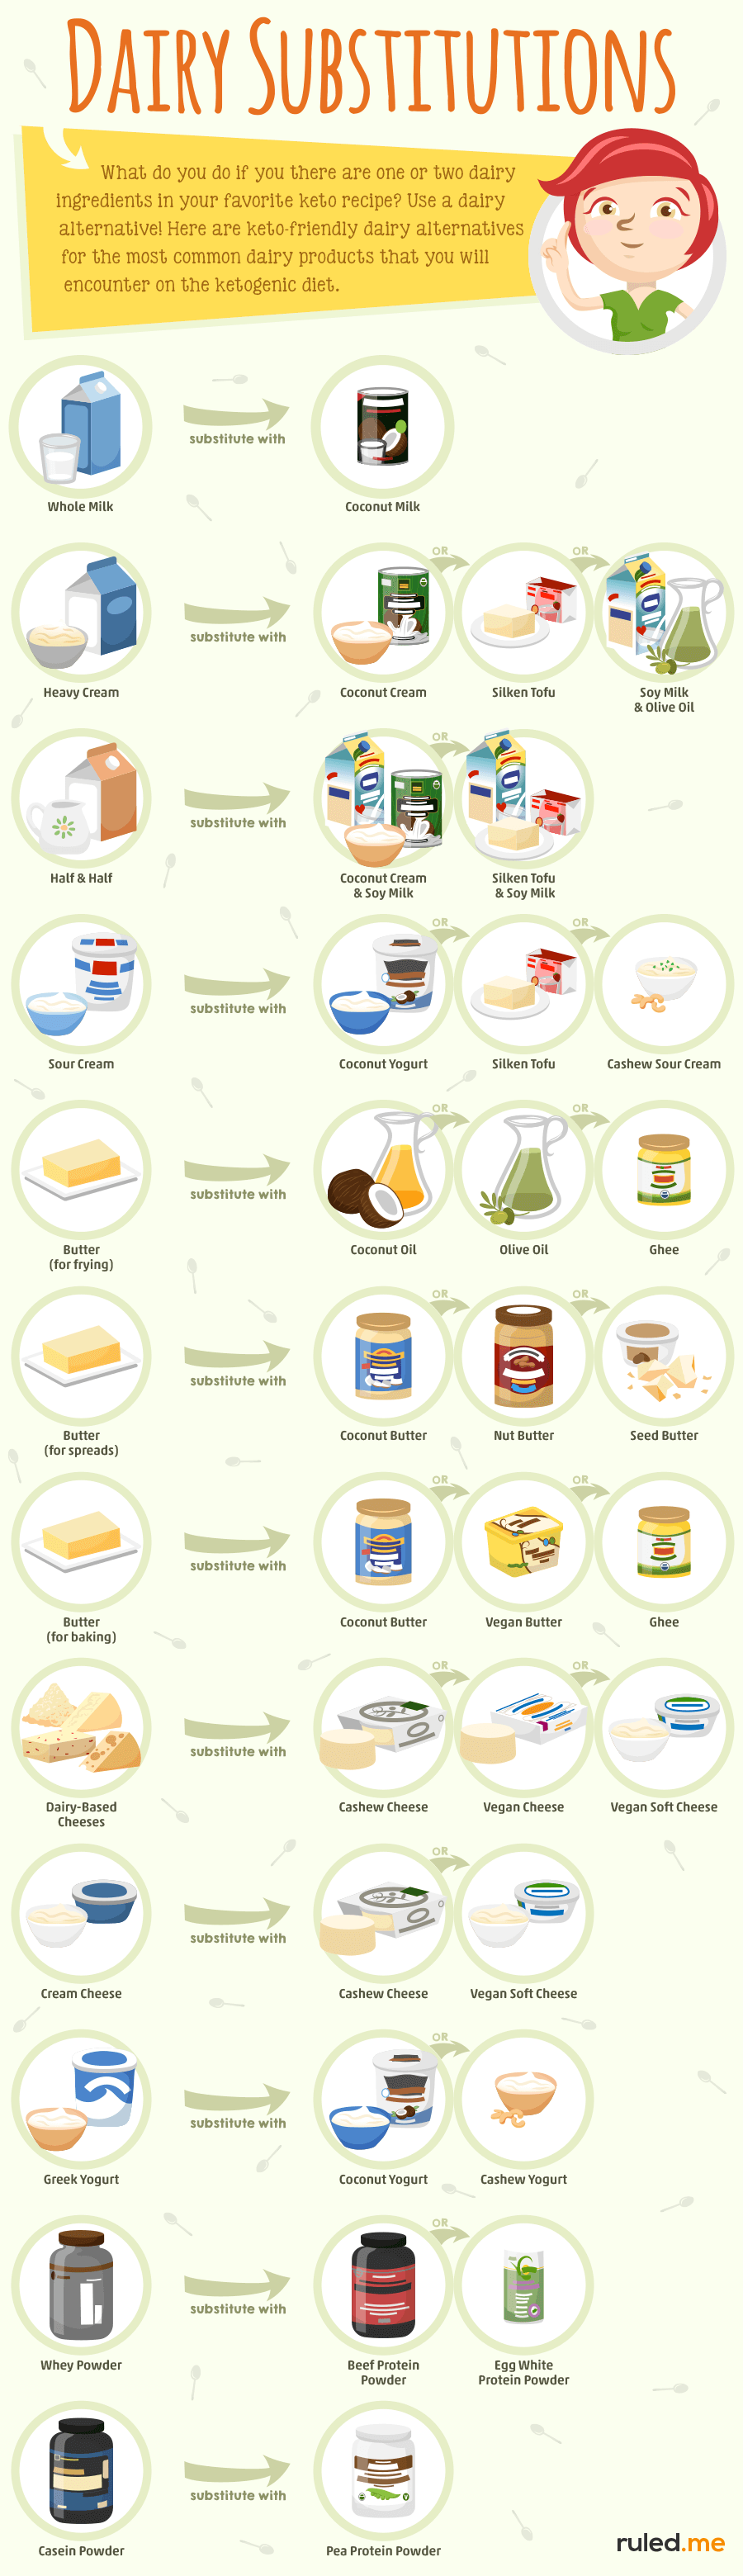 Common dairy substitutions on a ketogenic diet.